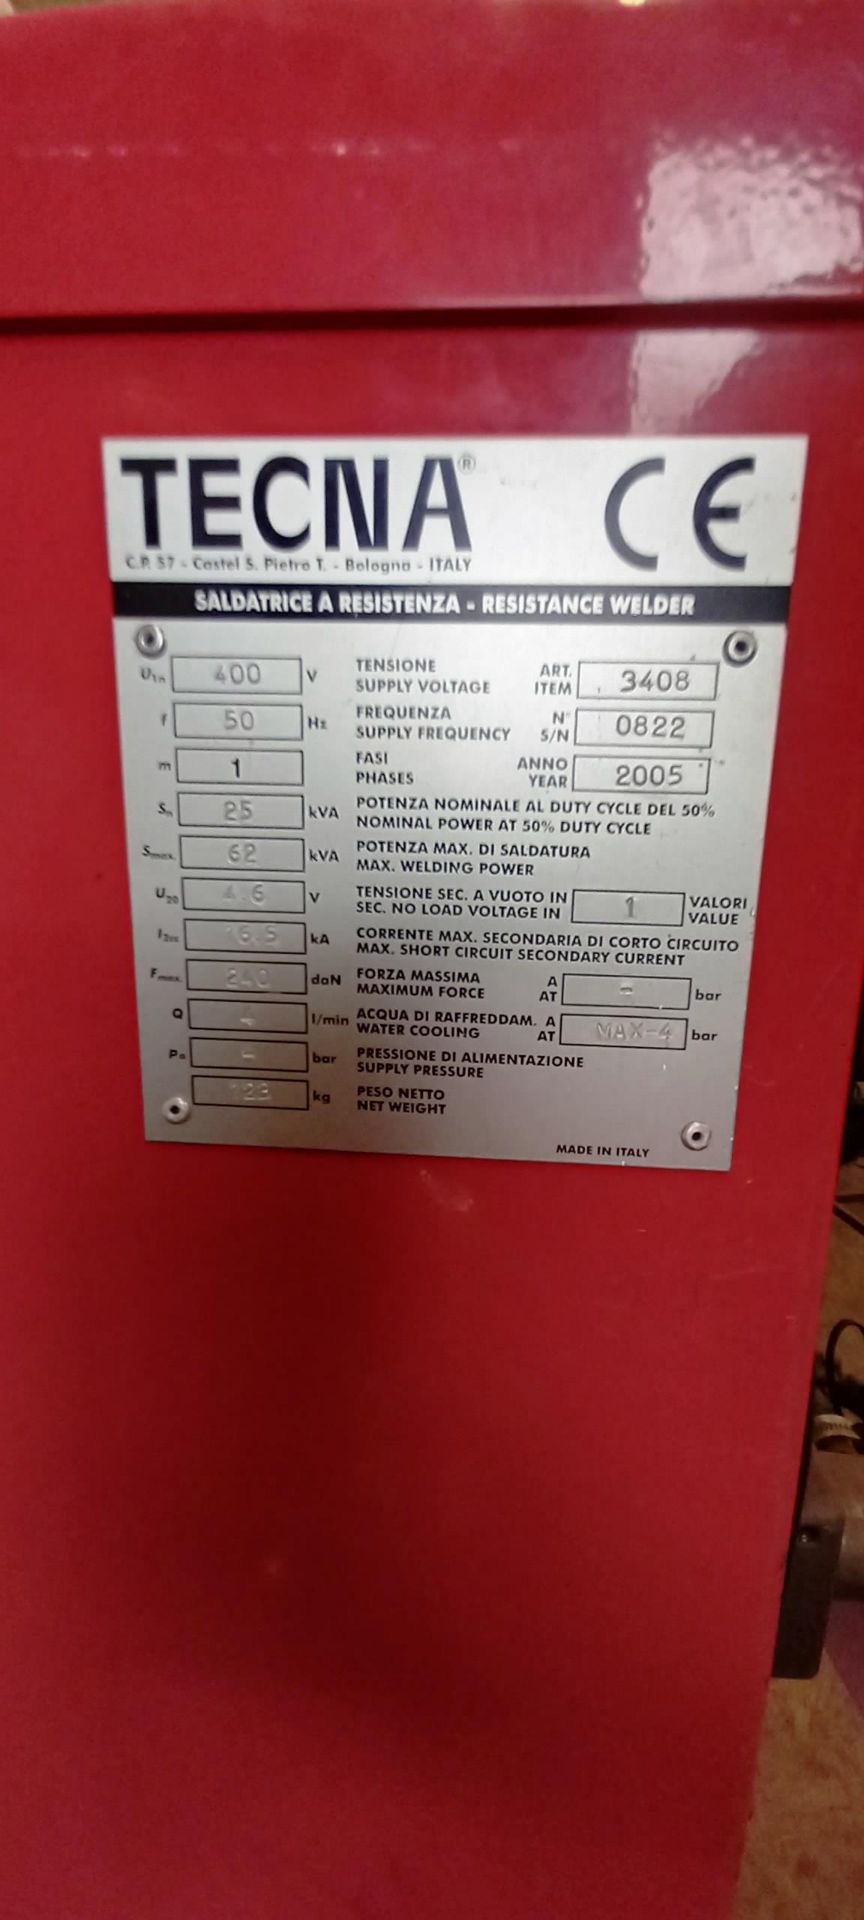 Tecna TE25 Spot Welding Machine with Chiller. S/N: 0822.Year: 2005 - Image 3 of 3